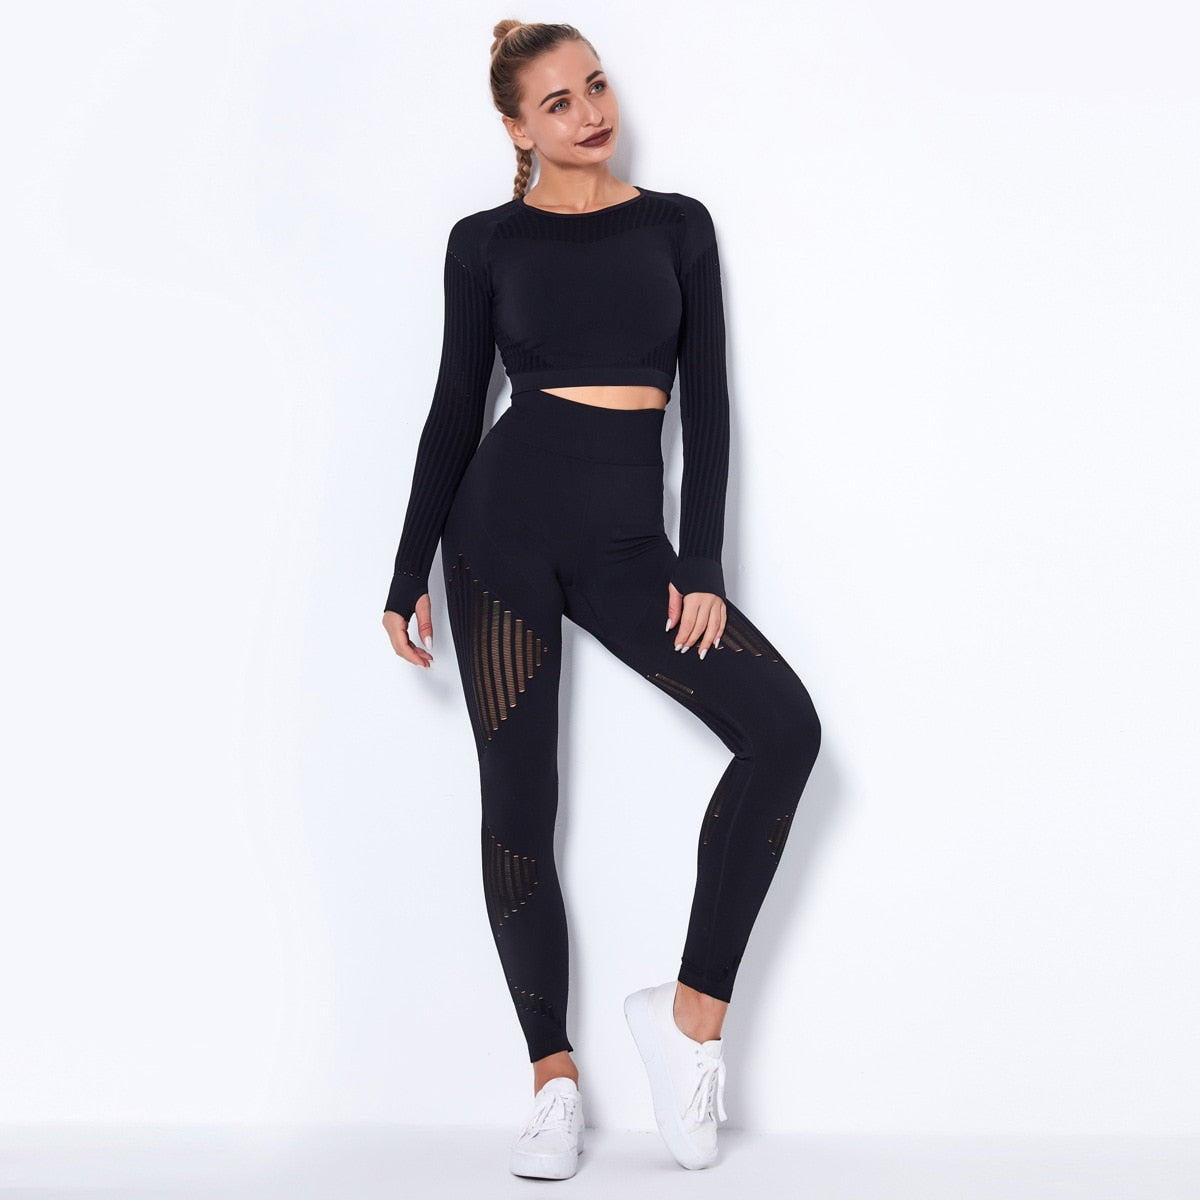 Workout Sets For Women 2 Piece Seamless Yoga Outfit Tracksuit High Waisted Yoga Leggings And Crop Top Gym Clothes Set   109.99 EZYSELLA SHOP